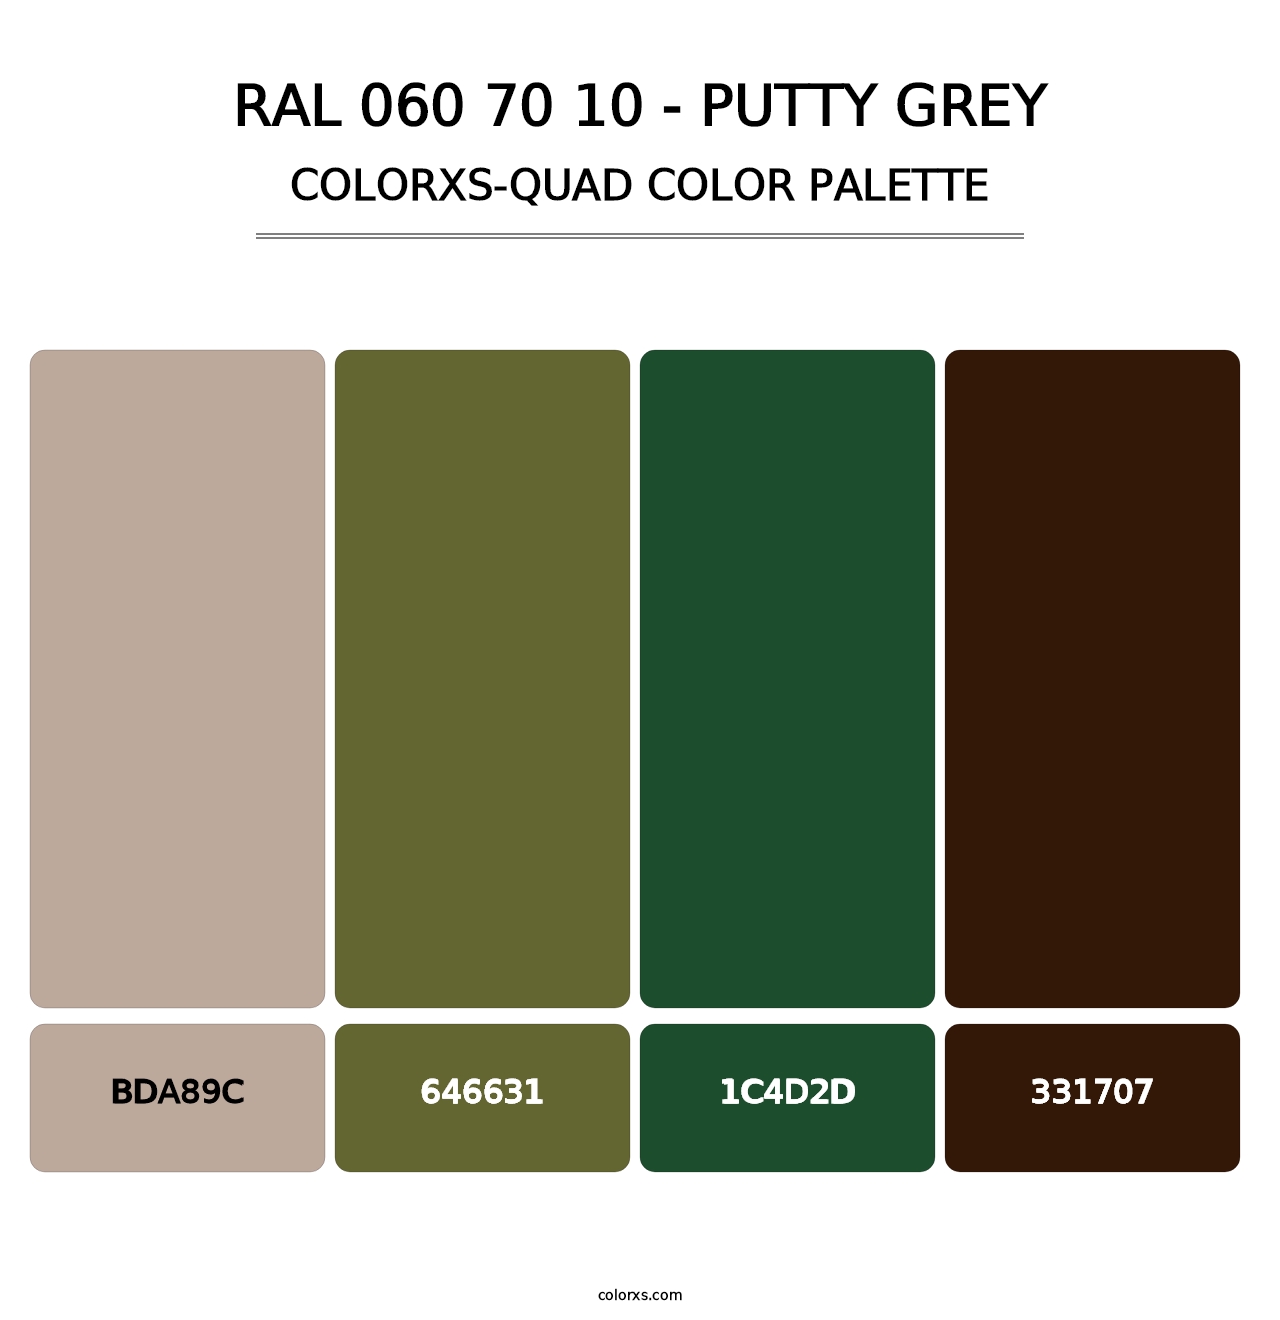 RAL 060 70 10 - Putty Grey - Colorxs Quad Palette